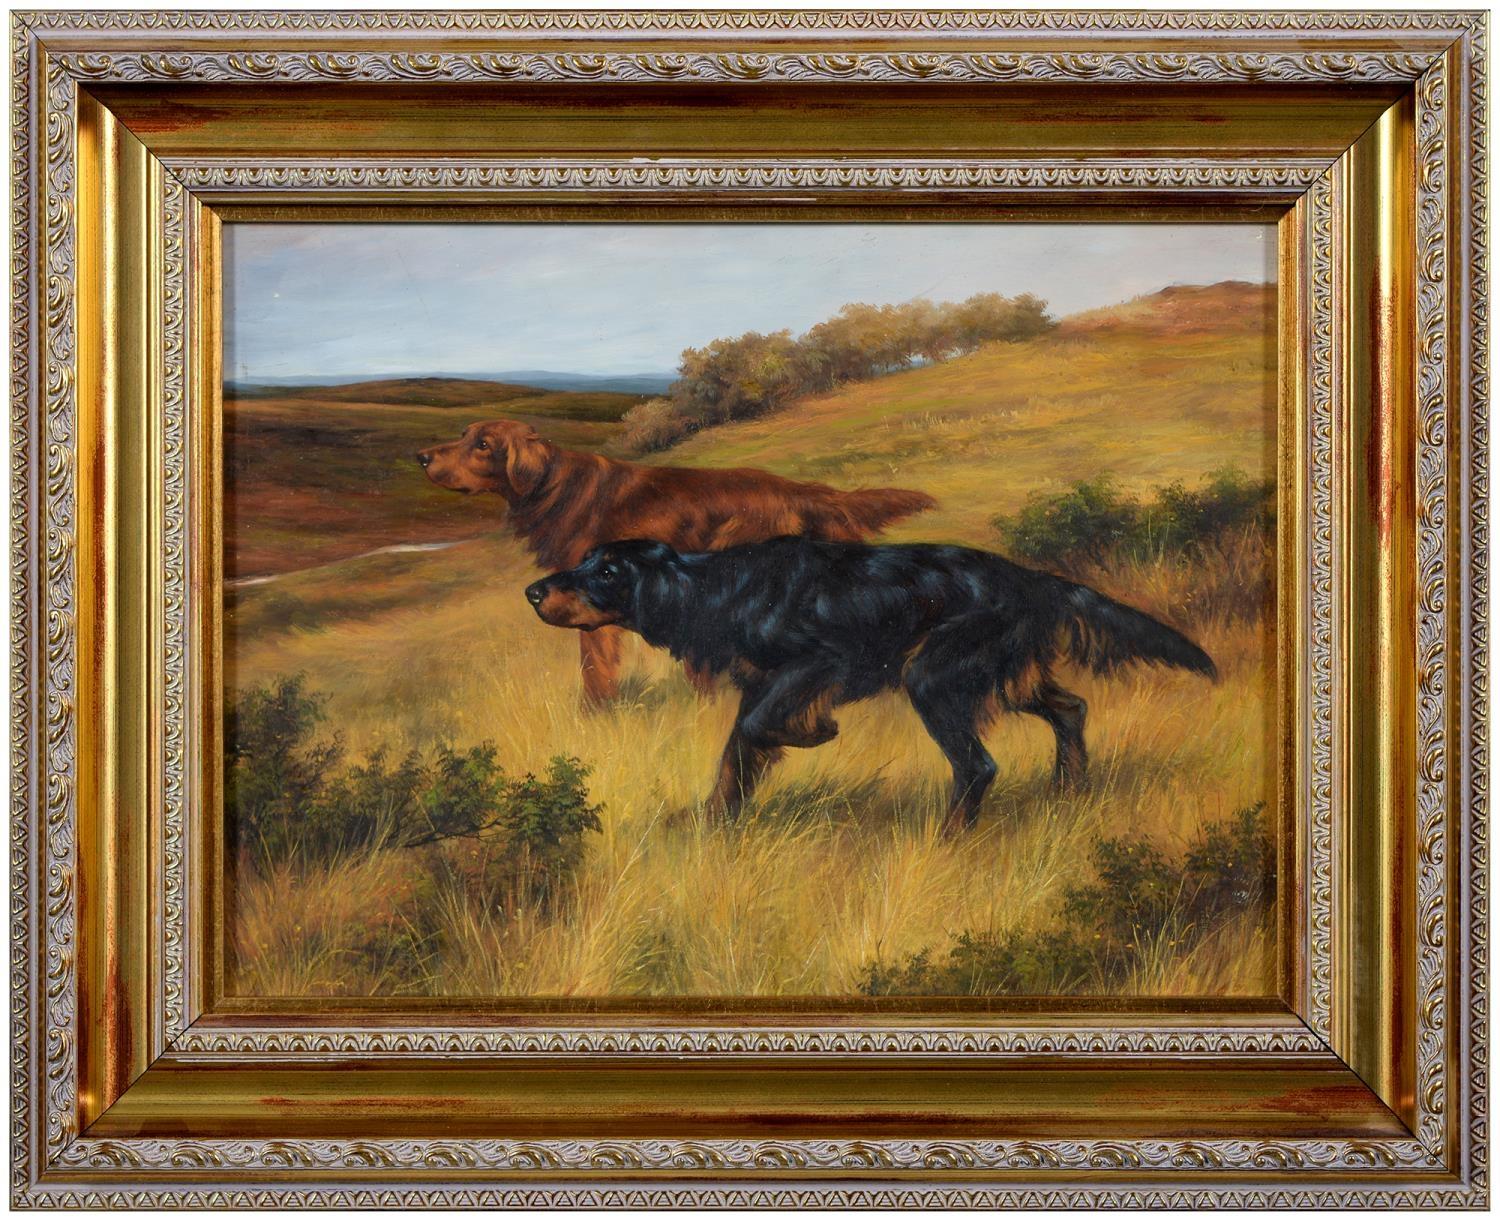 Manner of Arthur Wardle (English School)
20th century
oil on panel framed
framed: 15.5 x 21 inches
panel: 11.5 x 15.5 inches
provenance: private collection, UK
condition: very good and sound condition